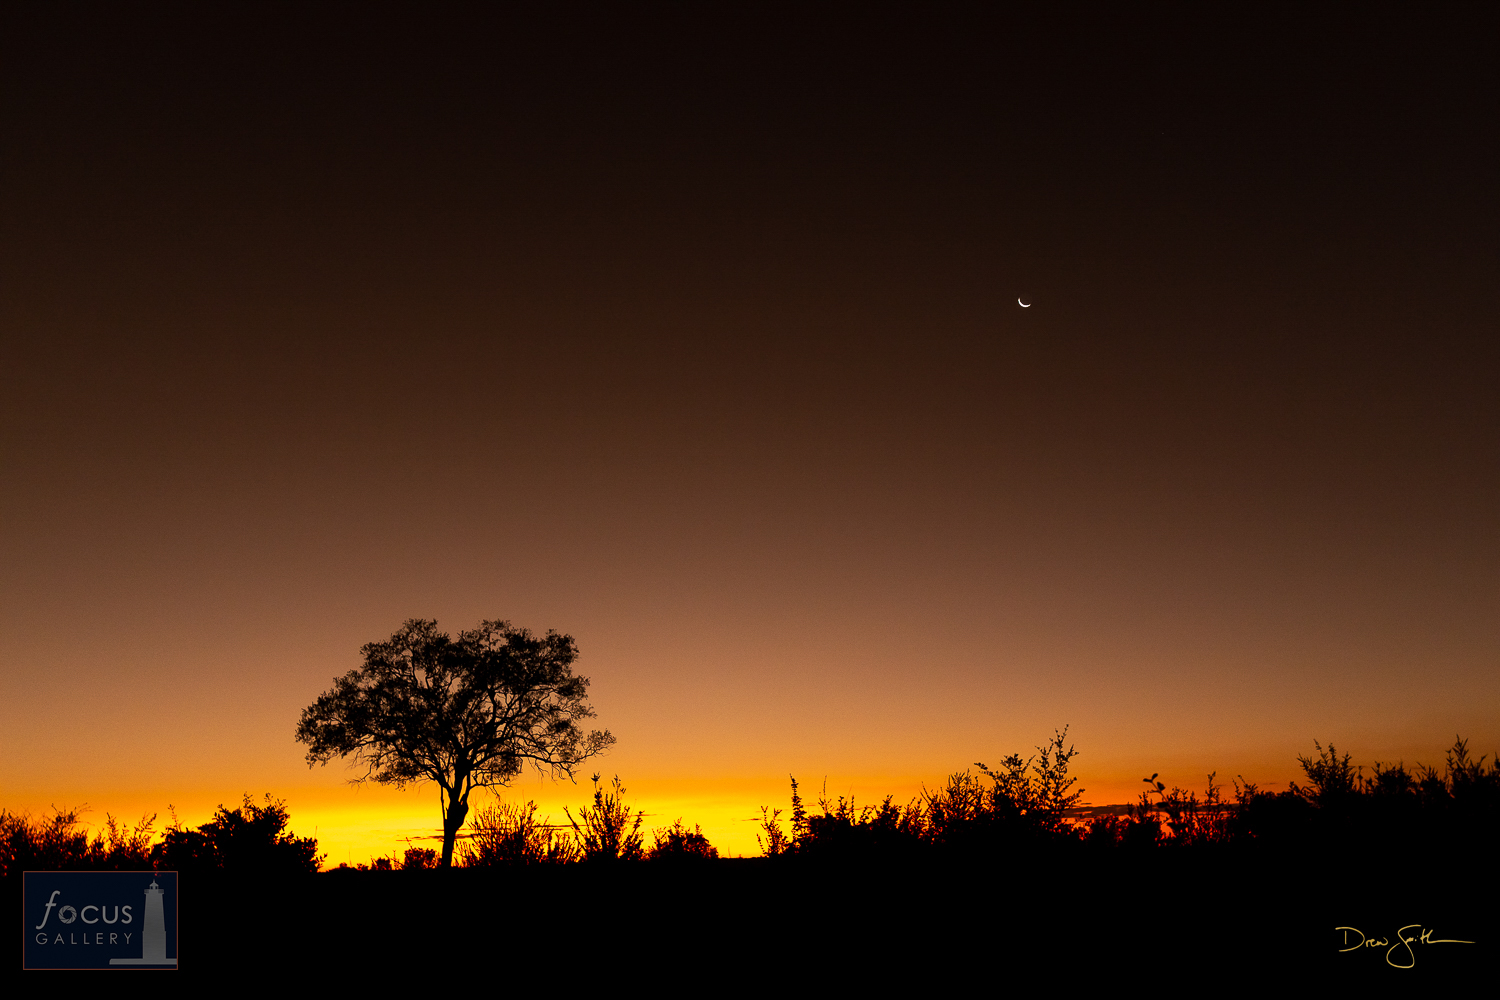 A tree is silhouetted against the vibrant glow of sunset, while a crescent moon hangs out in the sky. We were treated to a number...